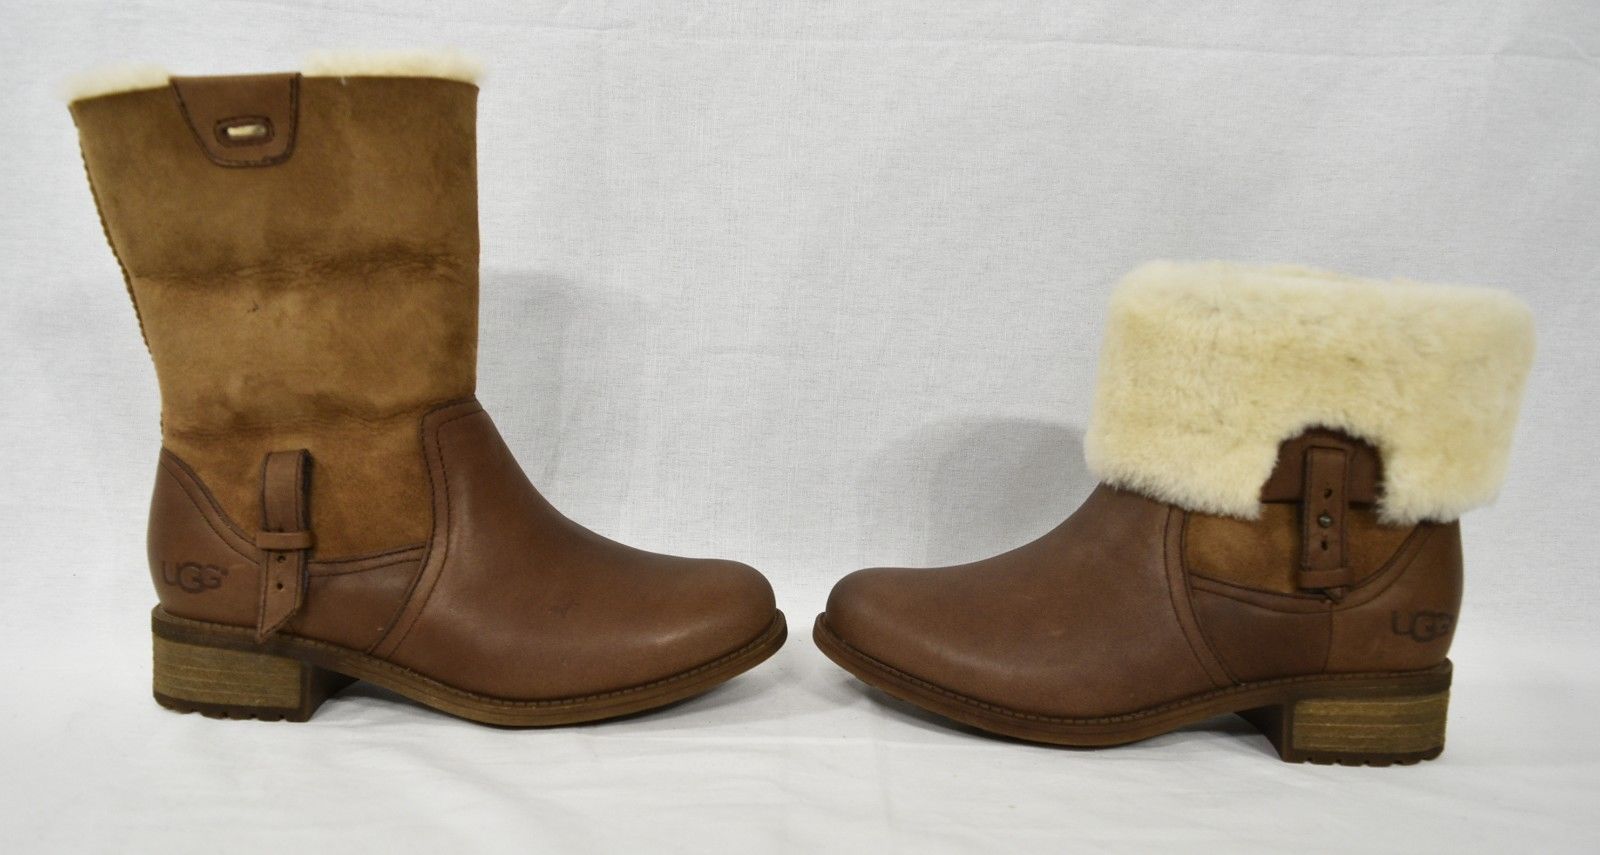 Primary image for UGG Chyler Demi Leather & Sheepskin Cuff Ankle/Short Boots US Women's 7/ UK 6